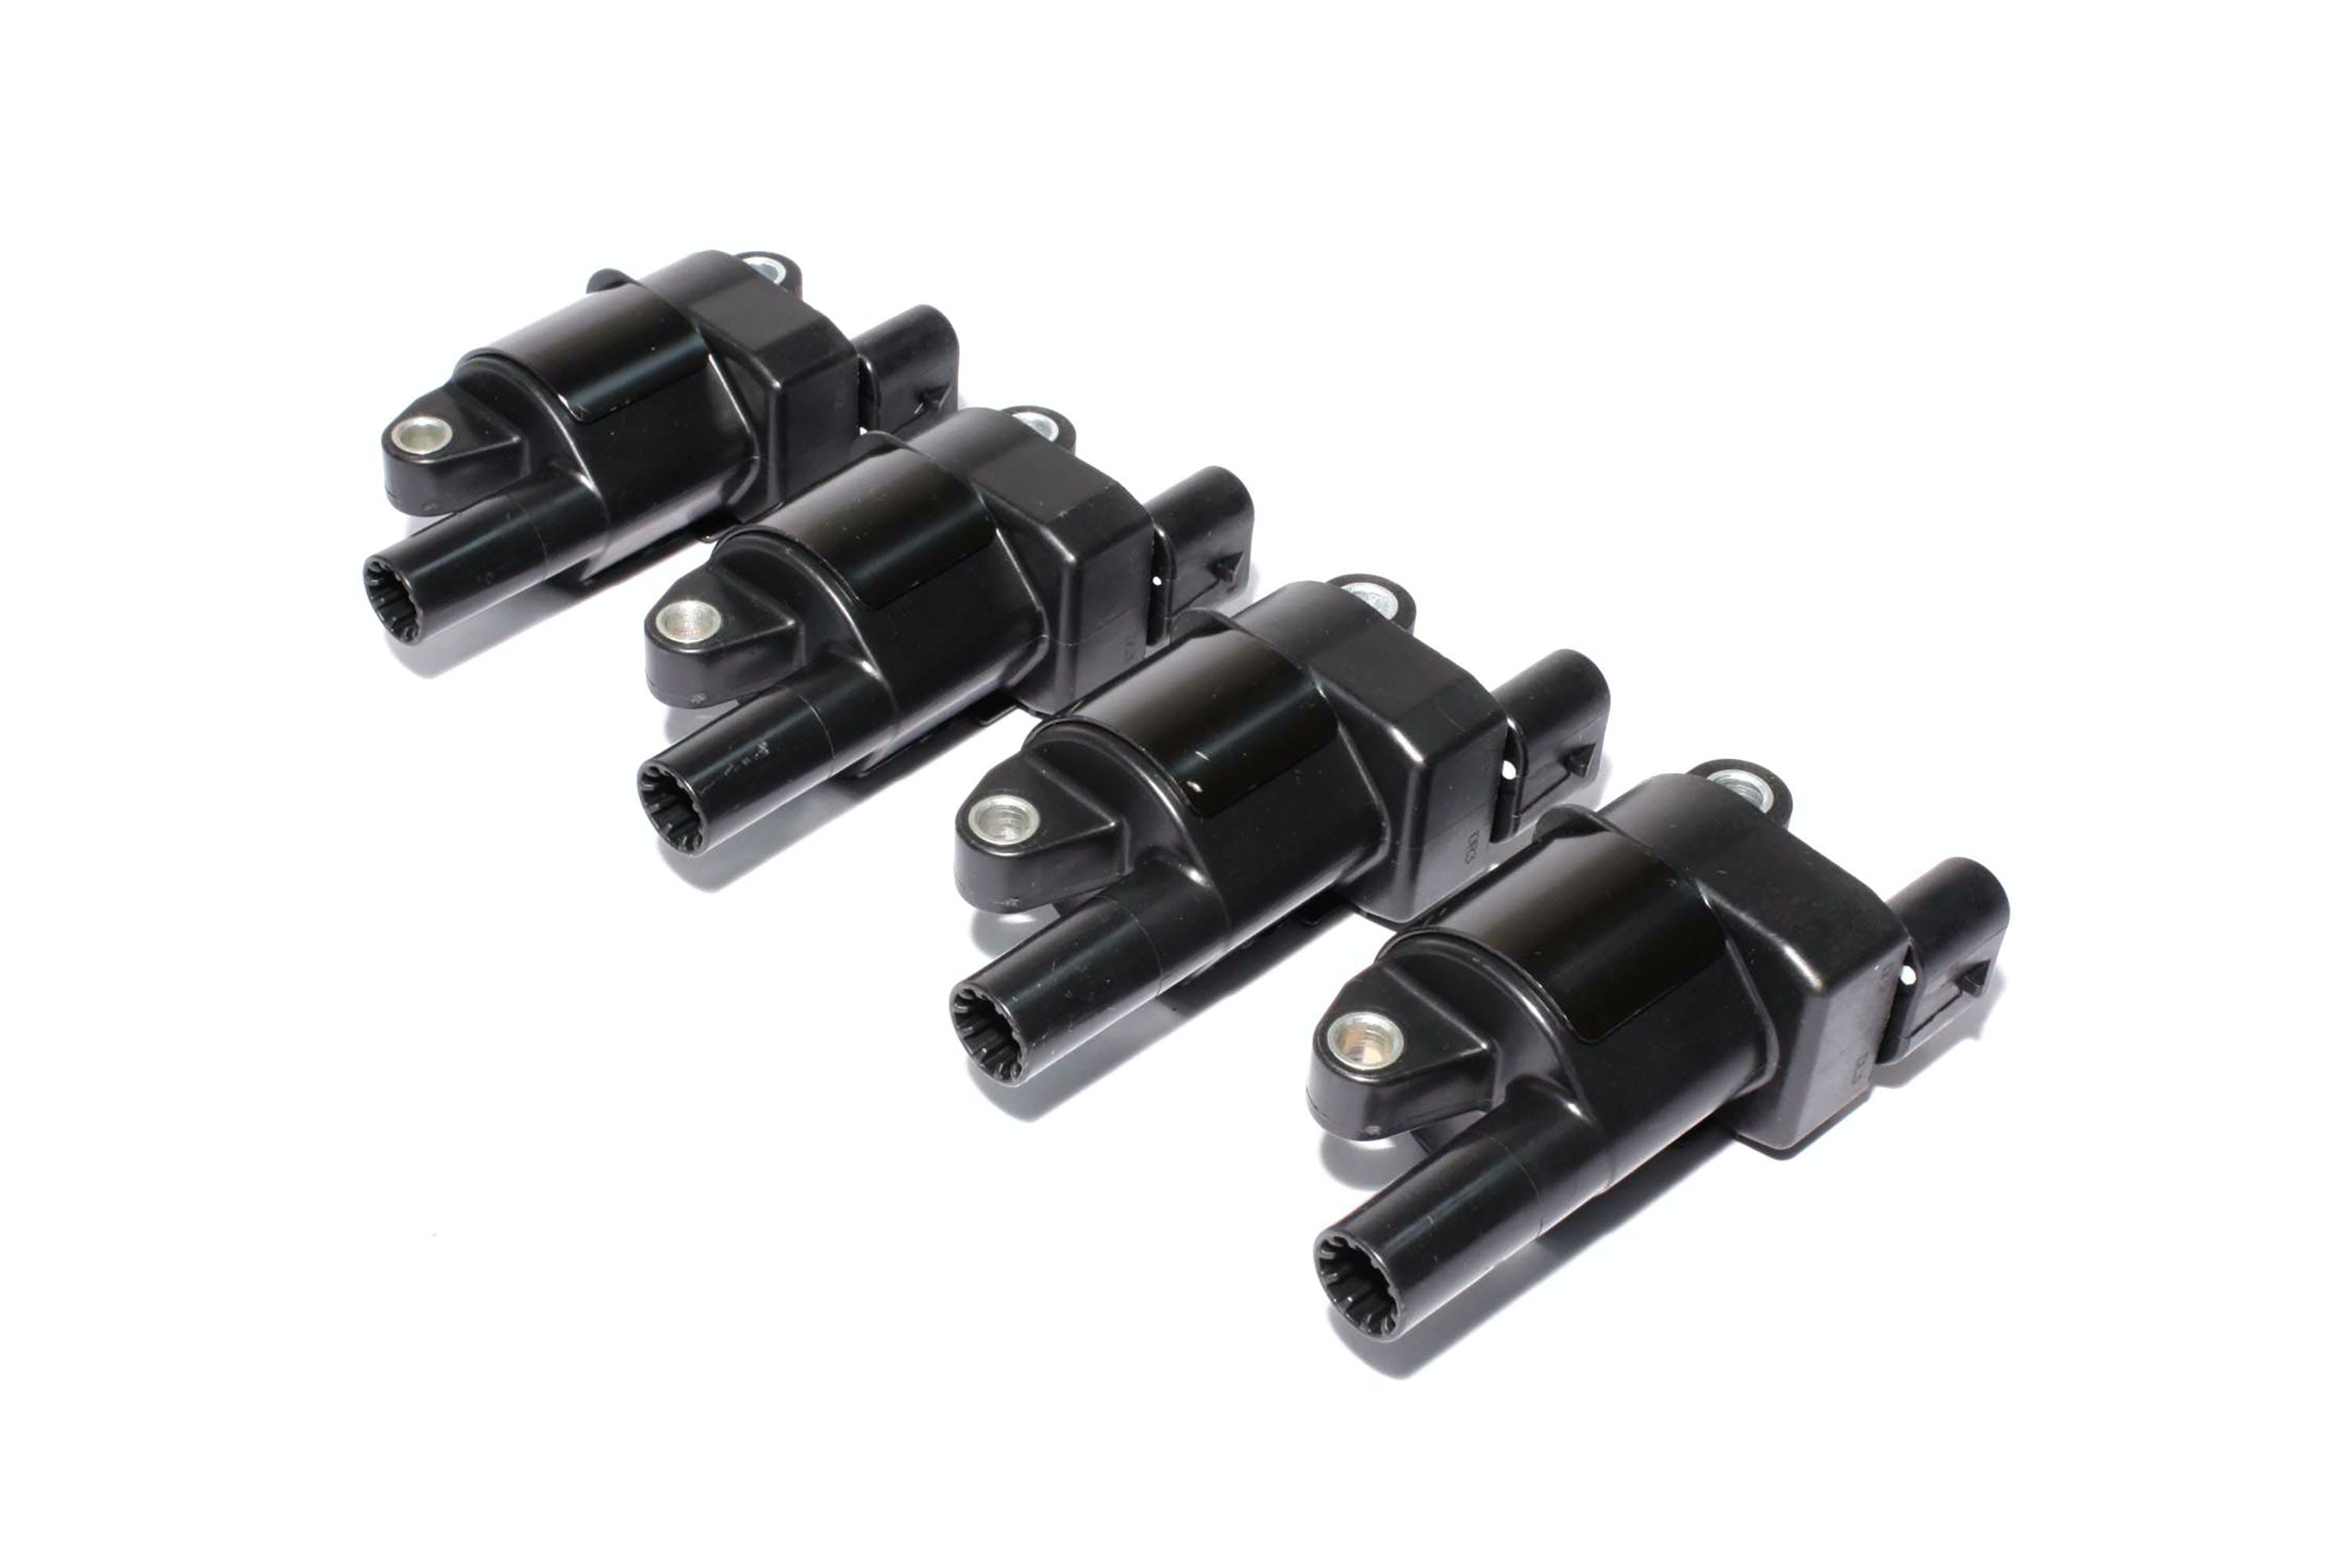 FAST - Fuel Air Spark Technology 30256-4 GM Gen IV L92 Truck Style Coil 4 Pack